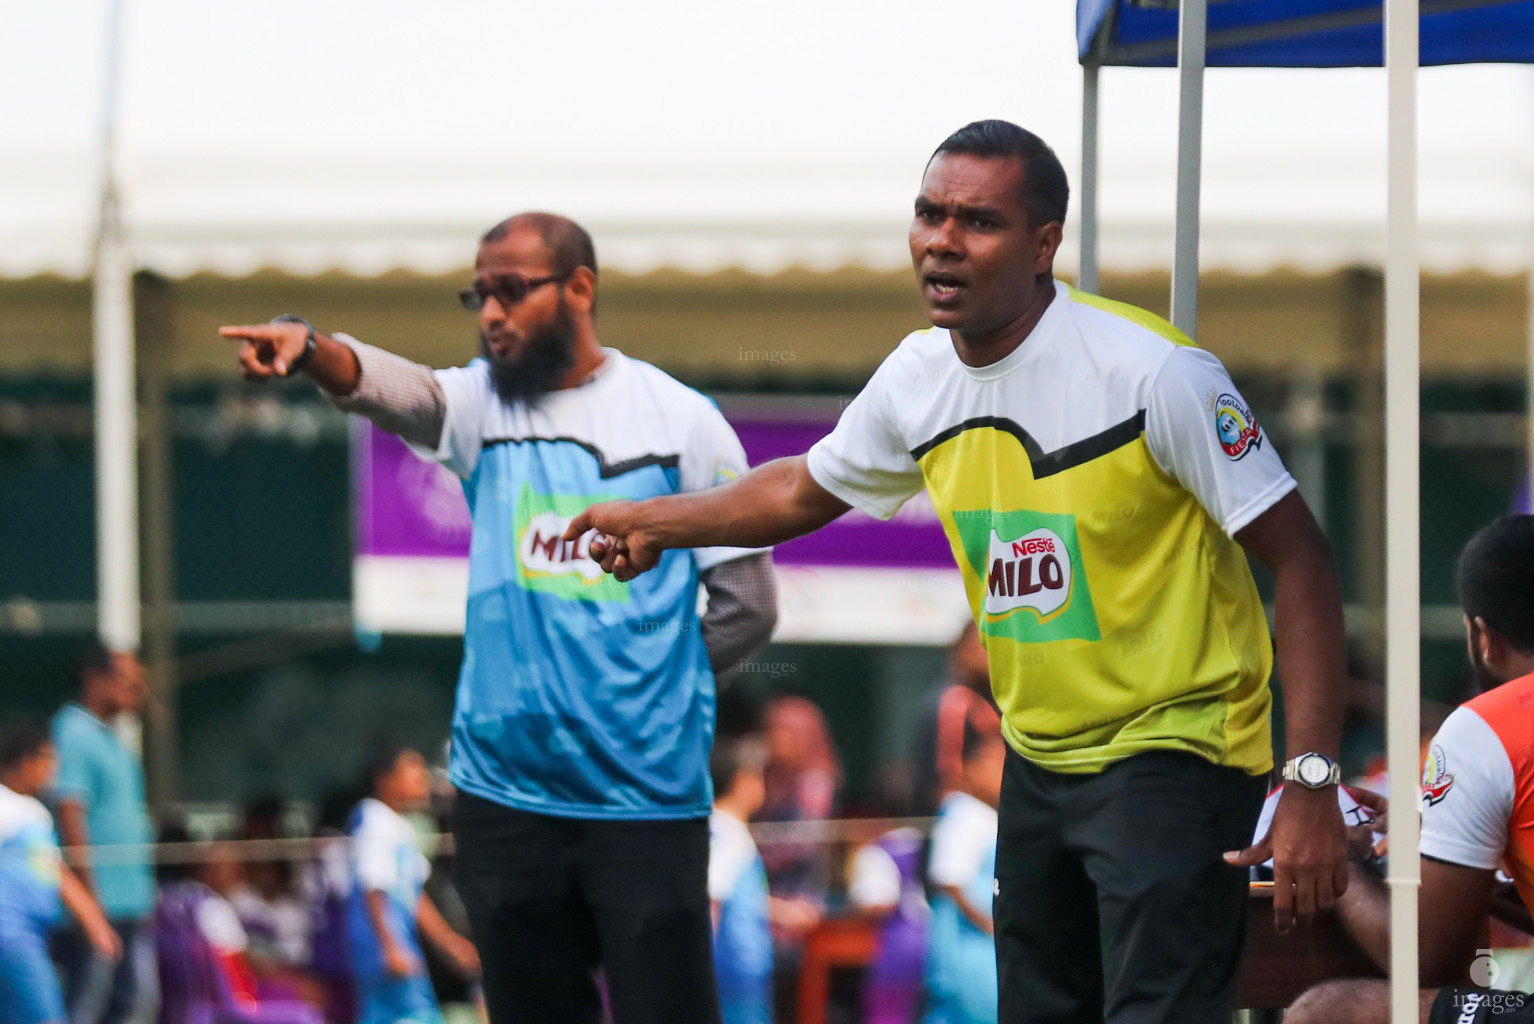 Day 1 of Milo Kids Football Fiesta in Henveiru Grounds in Male', Maldives, Wednesday, Fe20uary 19th 2019 (Images.mv Photo/Suadh Abdul Sattar)